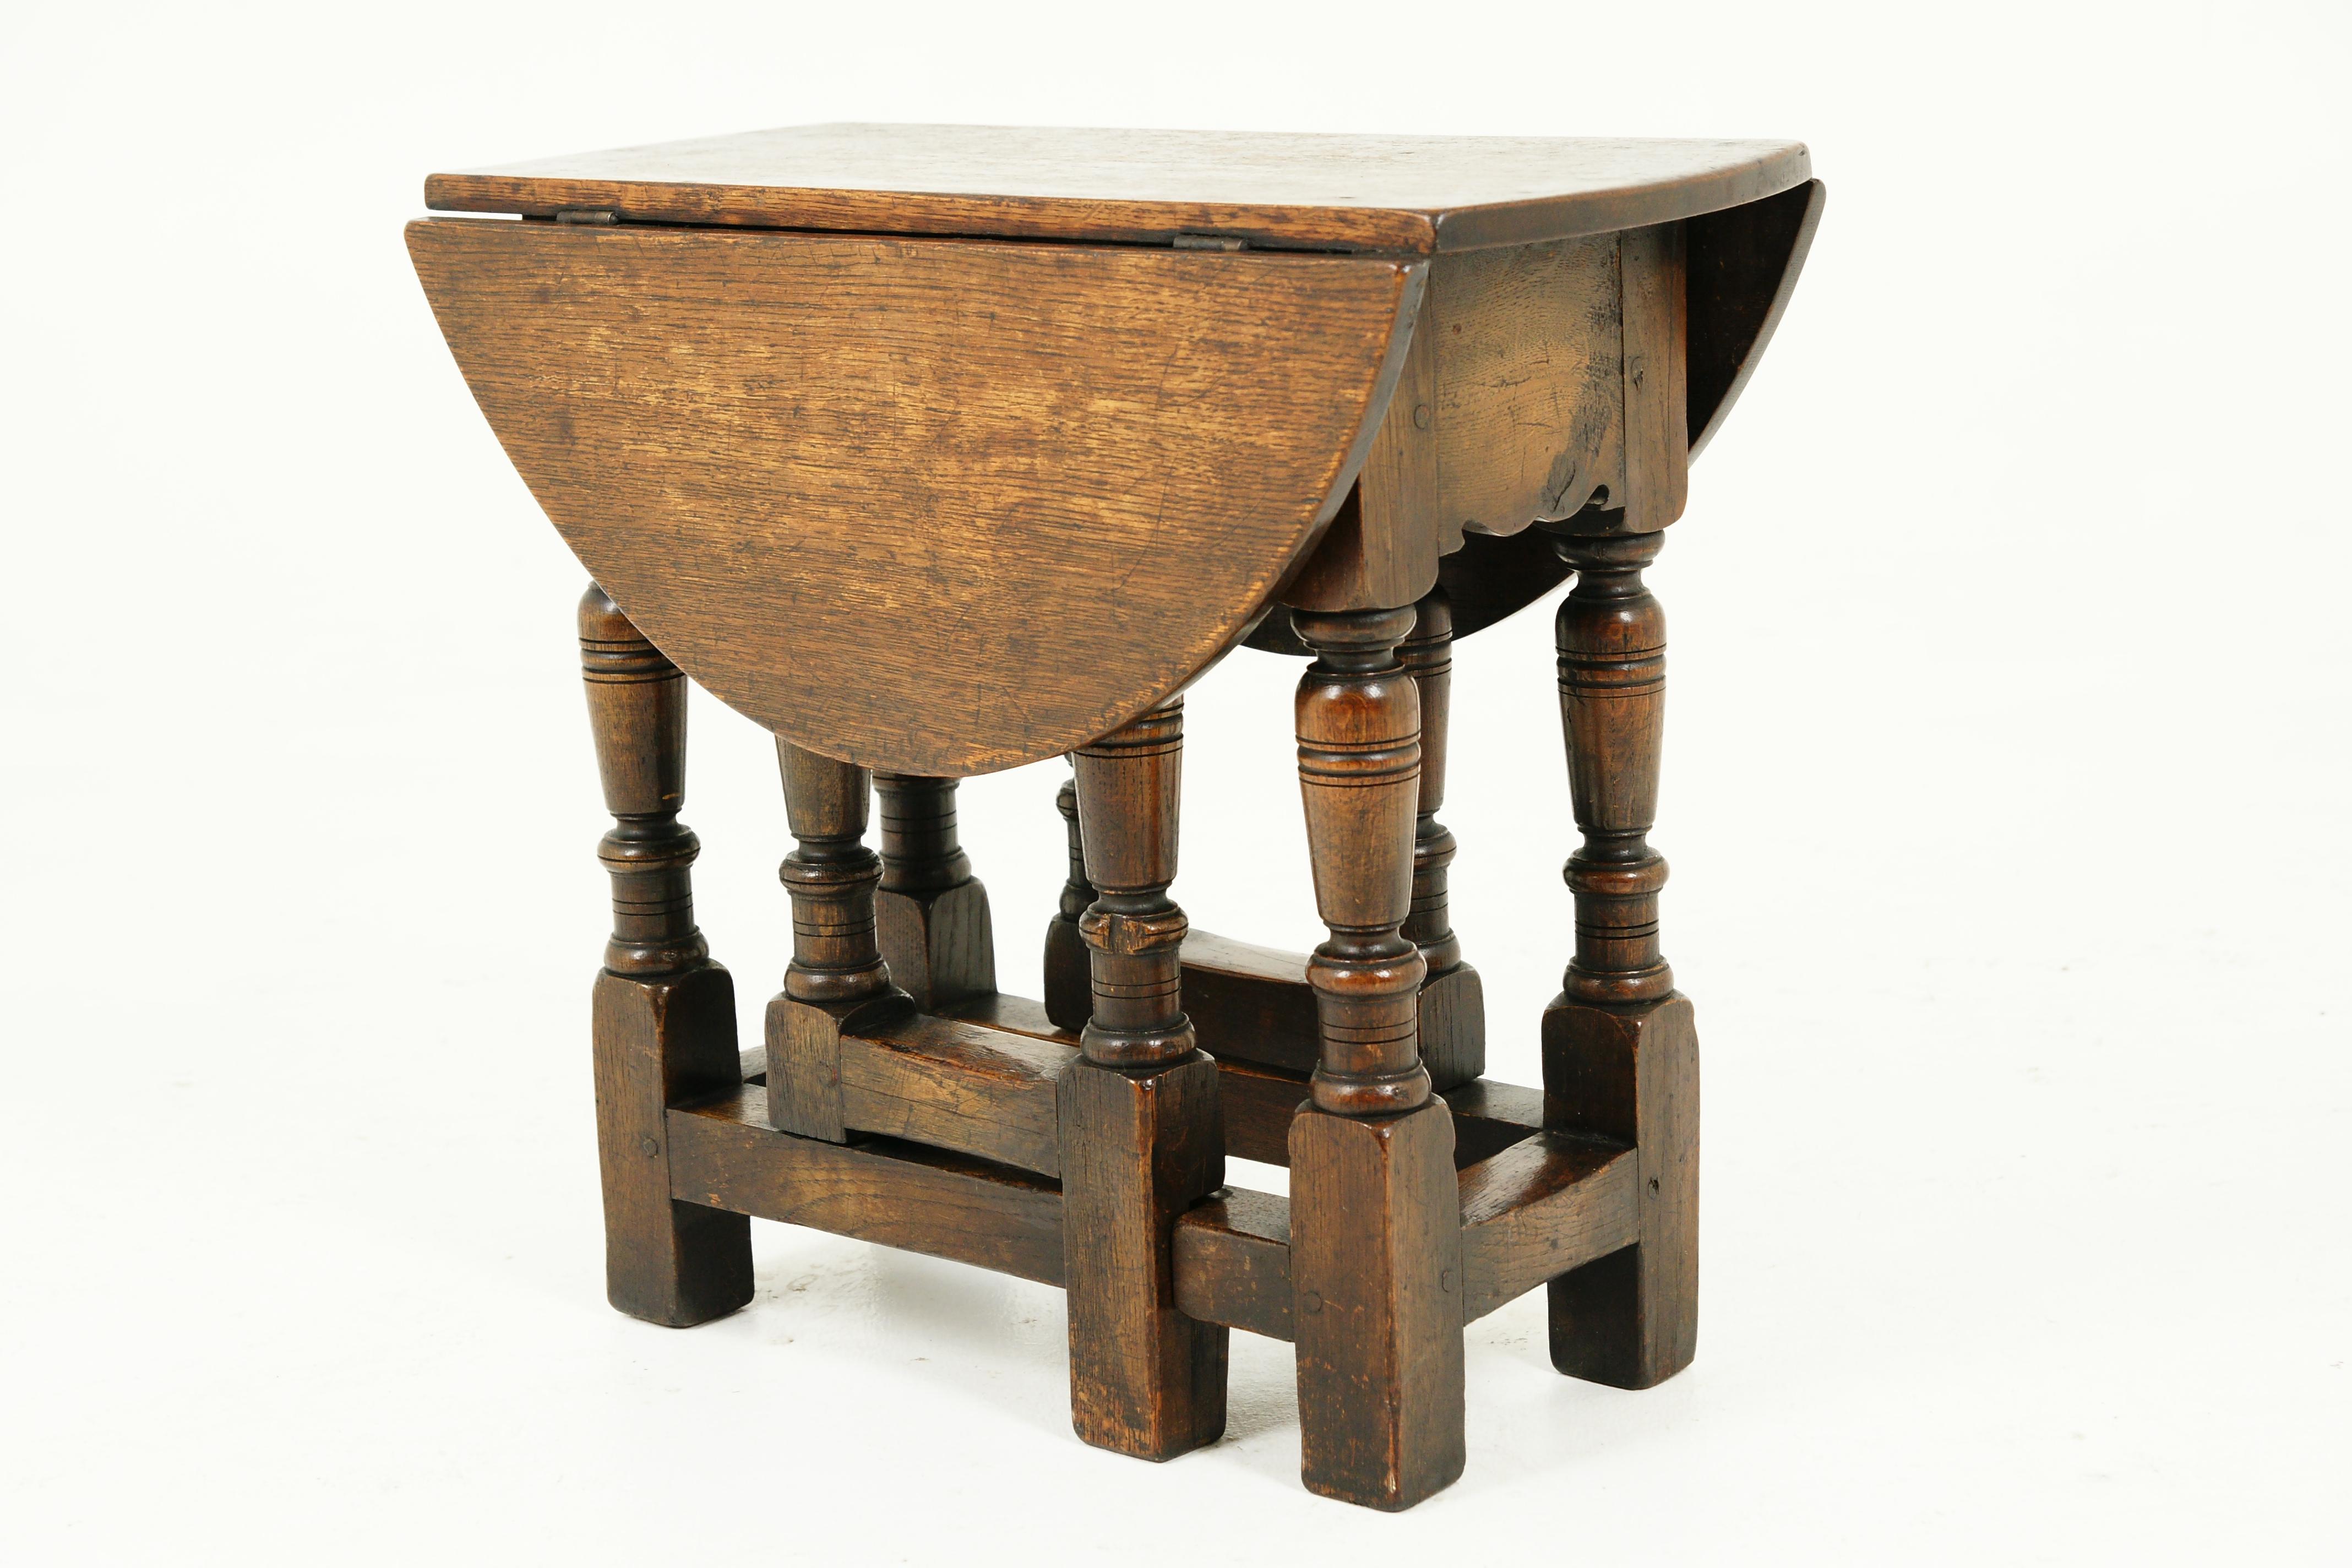 Small antique gateleg table, oak drop leaf table, Scotland 1920, B2389

Scotland 1920
Solid oak
Original finish
Rectangular solid oak top
Pair of half moon leaves on the sides
All standing on thick turned legs connected by stretchers
Note